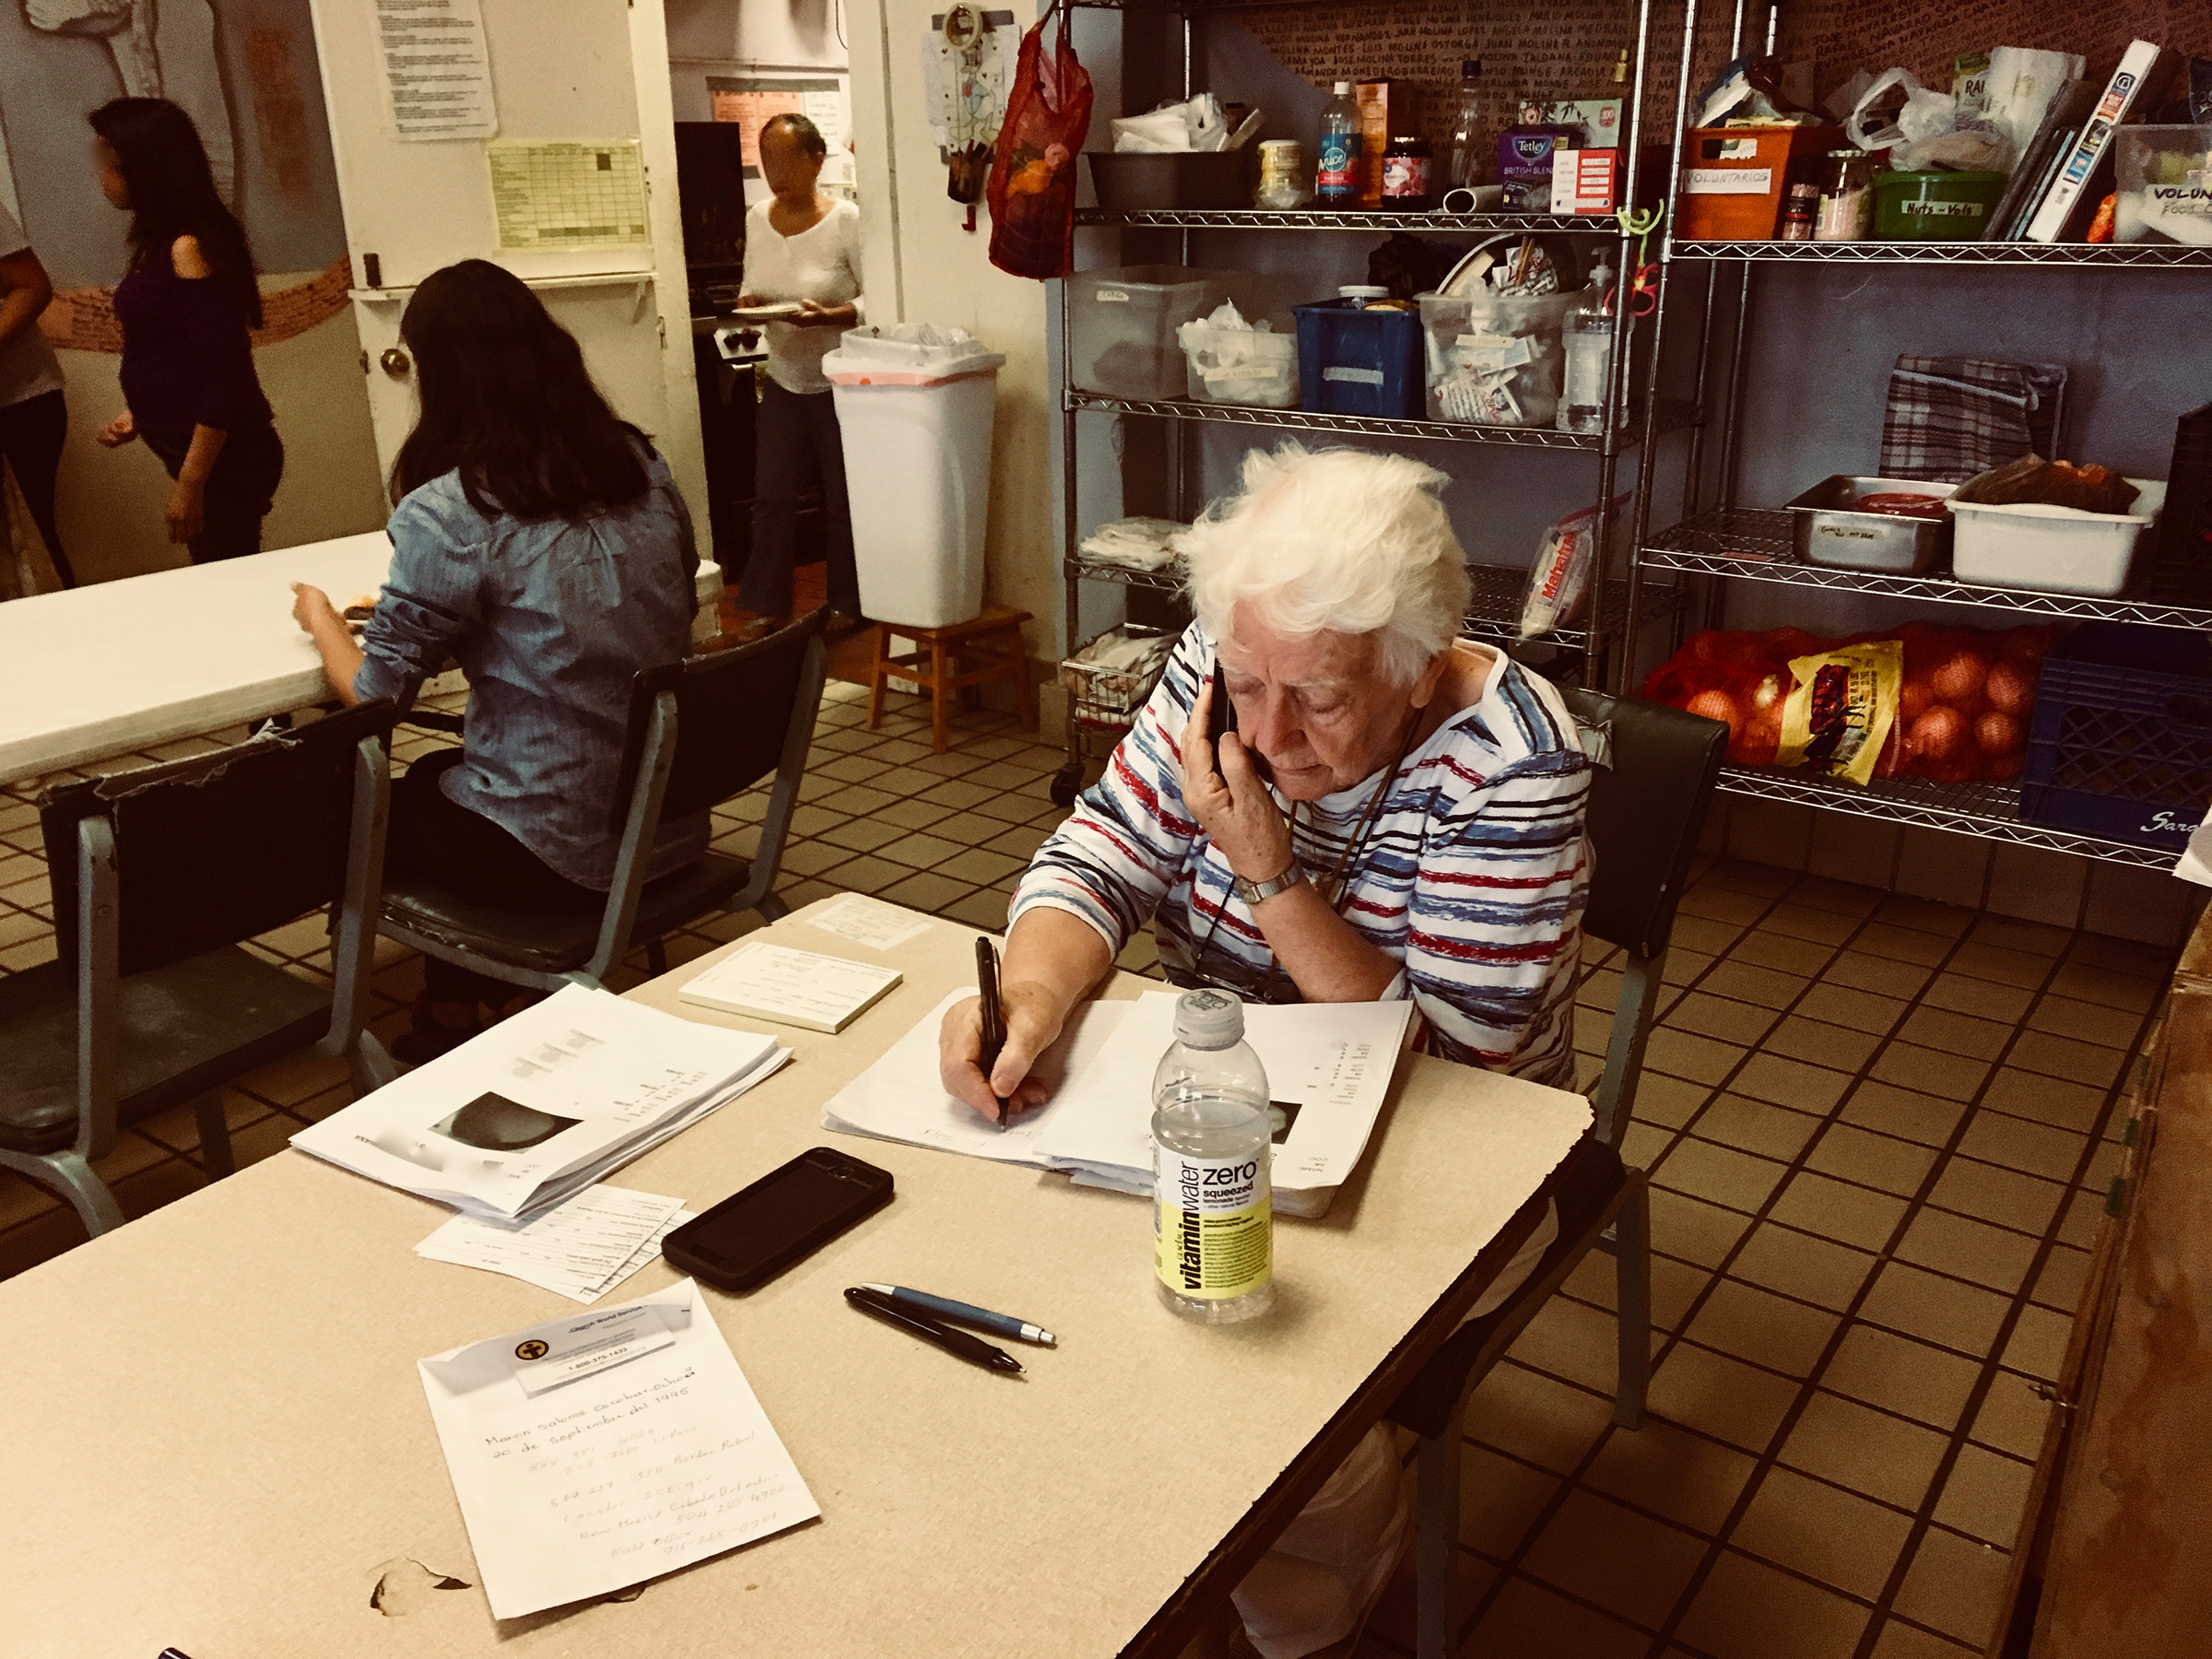 Sister Caroline Sweeney, a volunteer, makes calls to the families of recent arrivals in Casa Vides in El Paso, Texas in August 2019. (Courtesy of Lily Moore-Eissenberg)